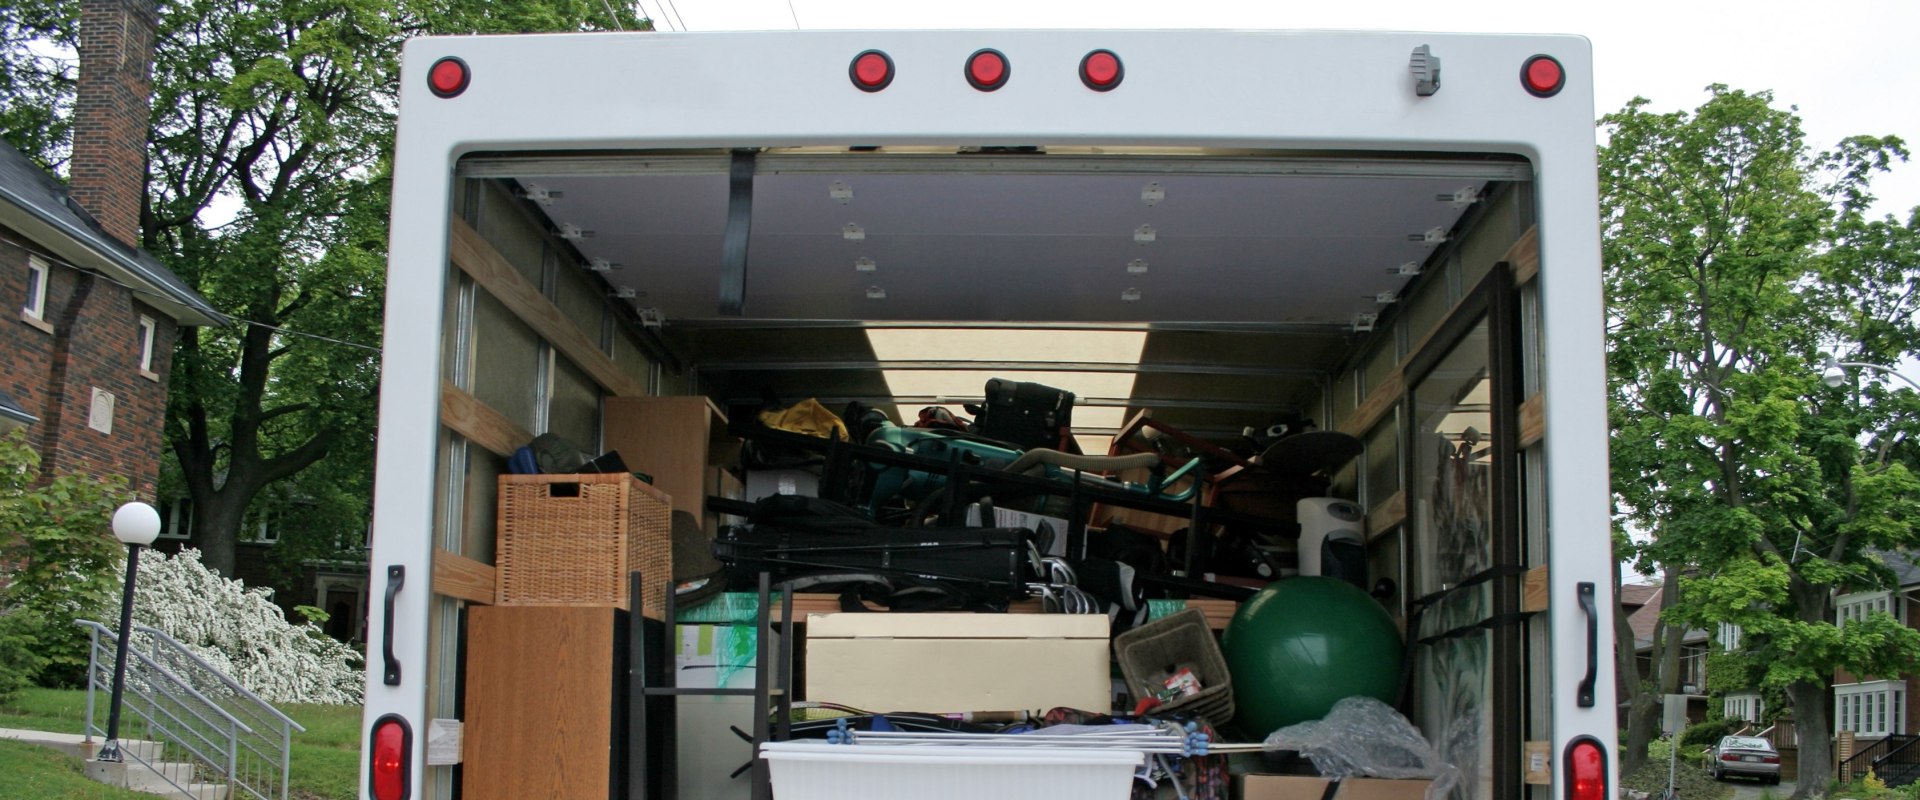 How Long Does it Take to Pack a Uhaul Truck? - An Expert's Guide